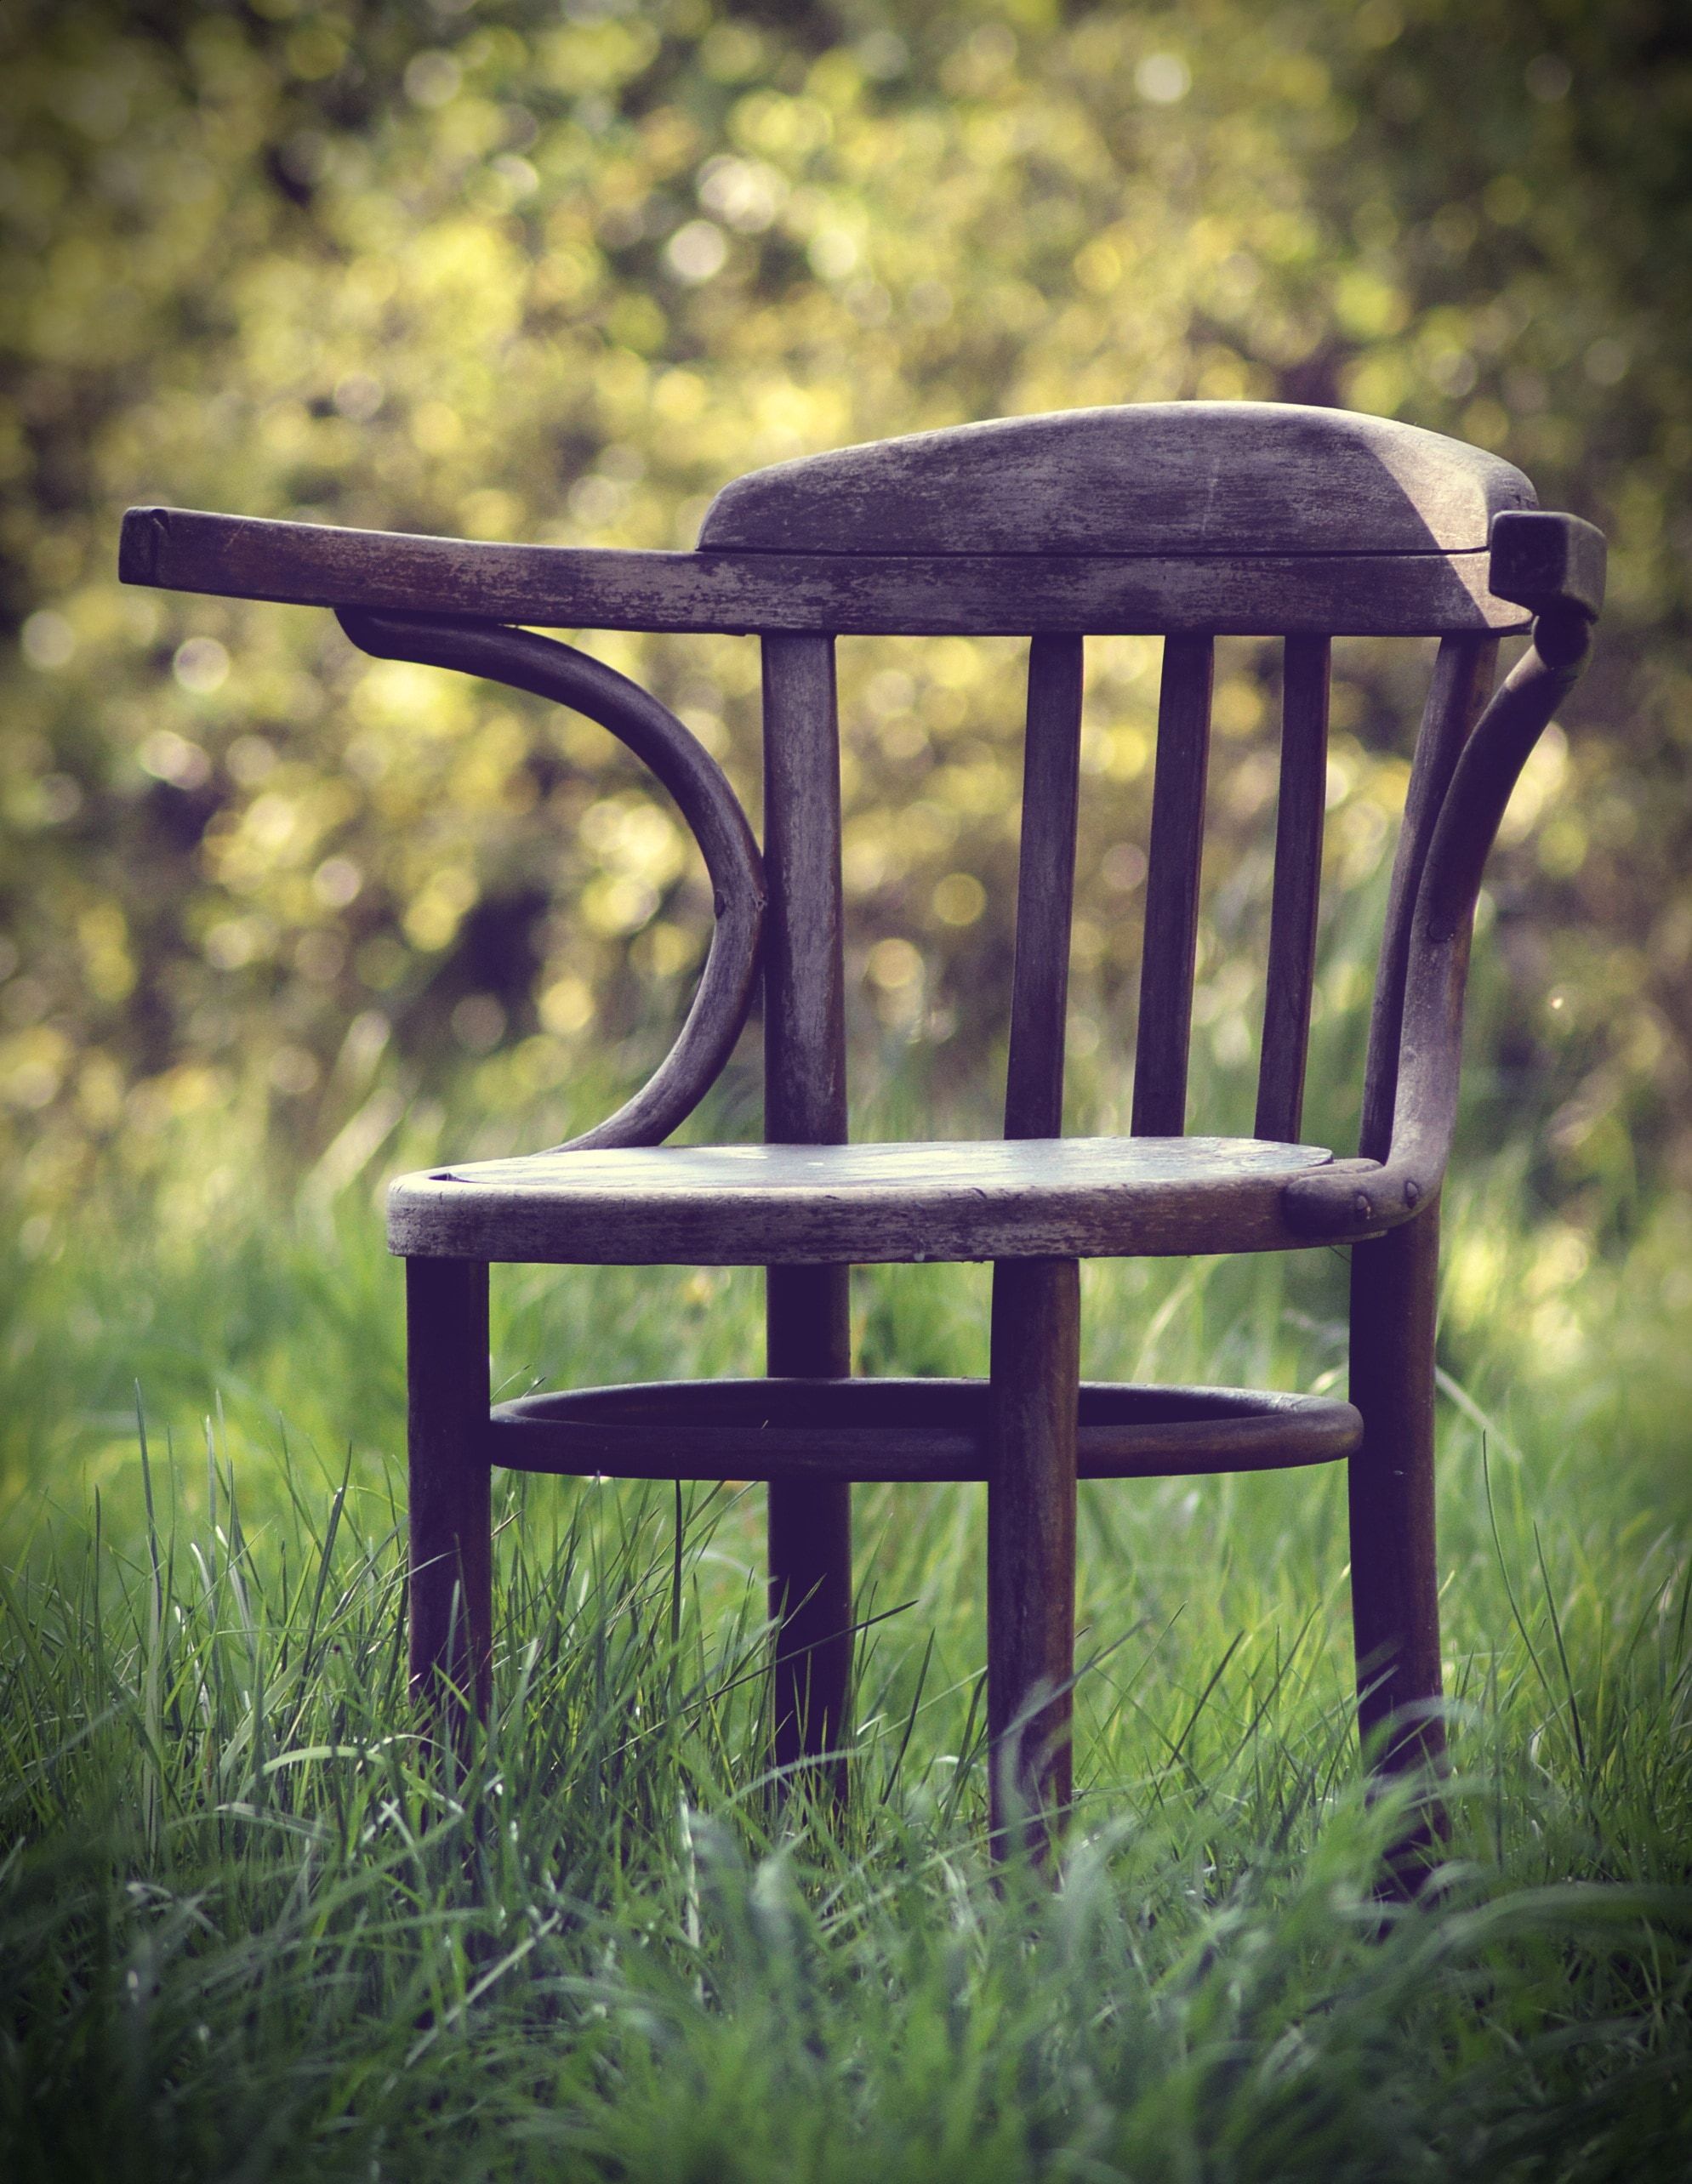 royalty free garden chairs image